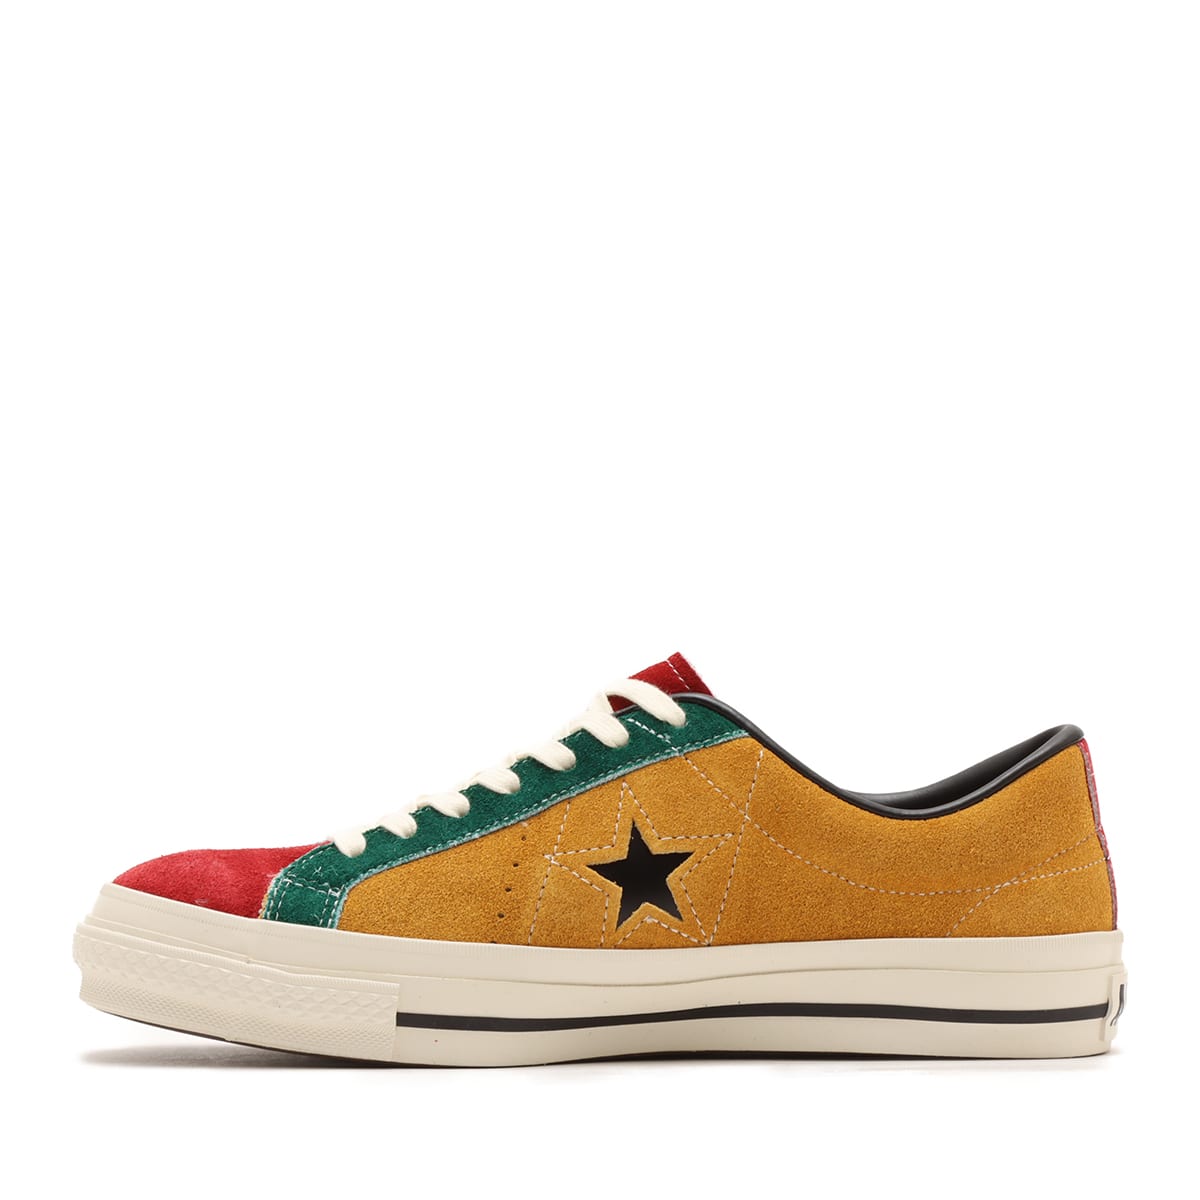 CONVERSE ONE STAR J SUEDE MT マルチ 24SS-I